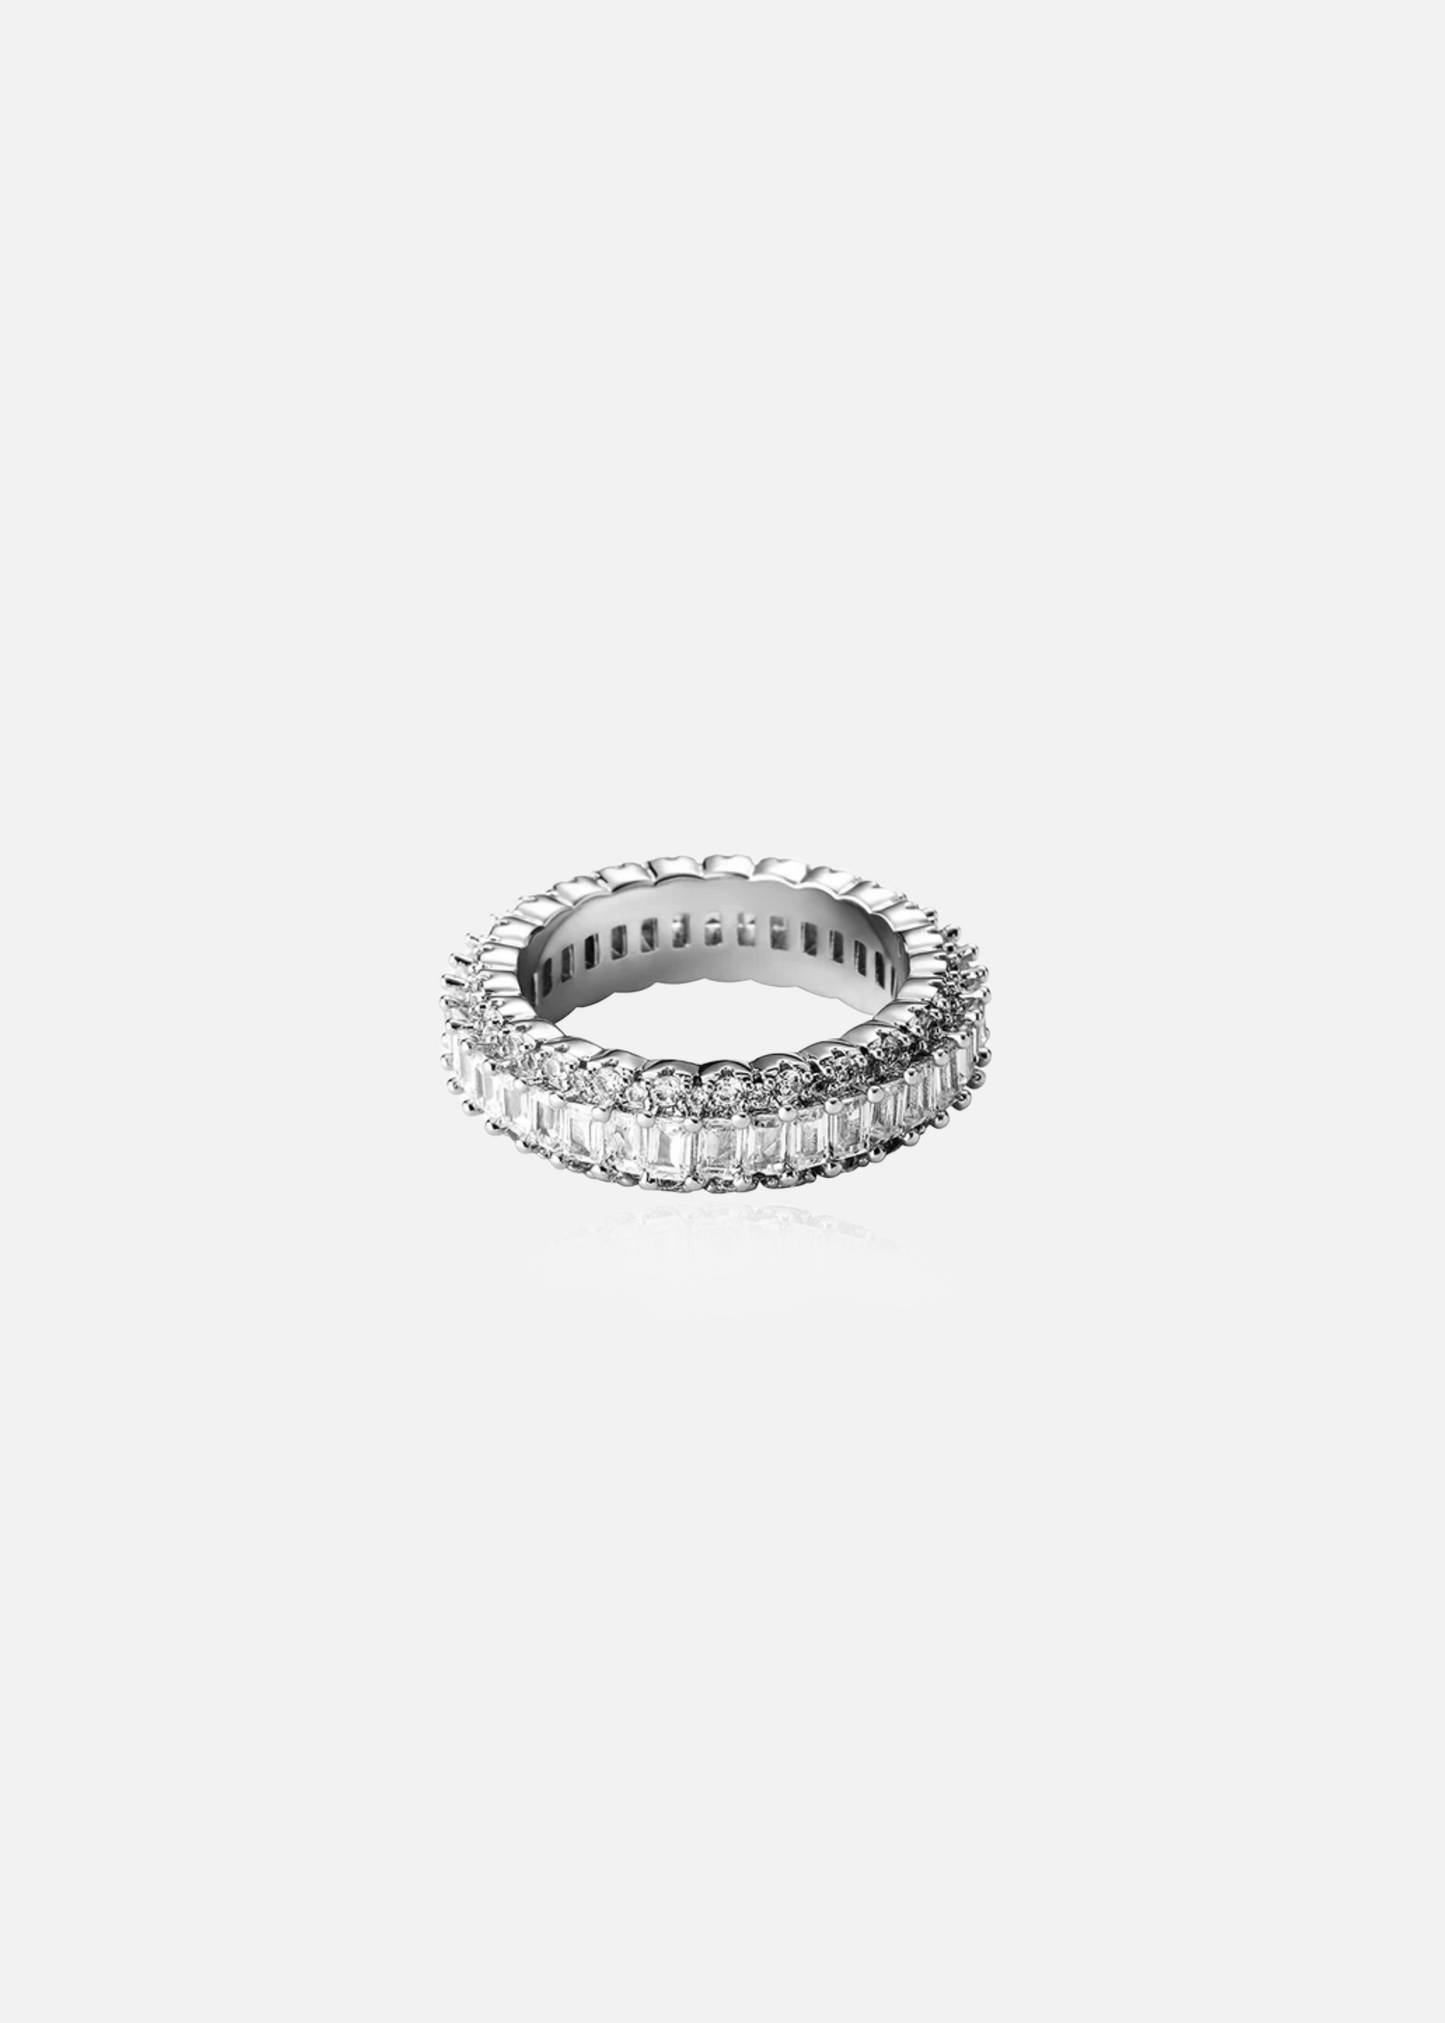 Silver Rhodium Plated Claw Set 1 Row CZ Stone Iced Out Ring